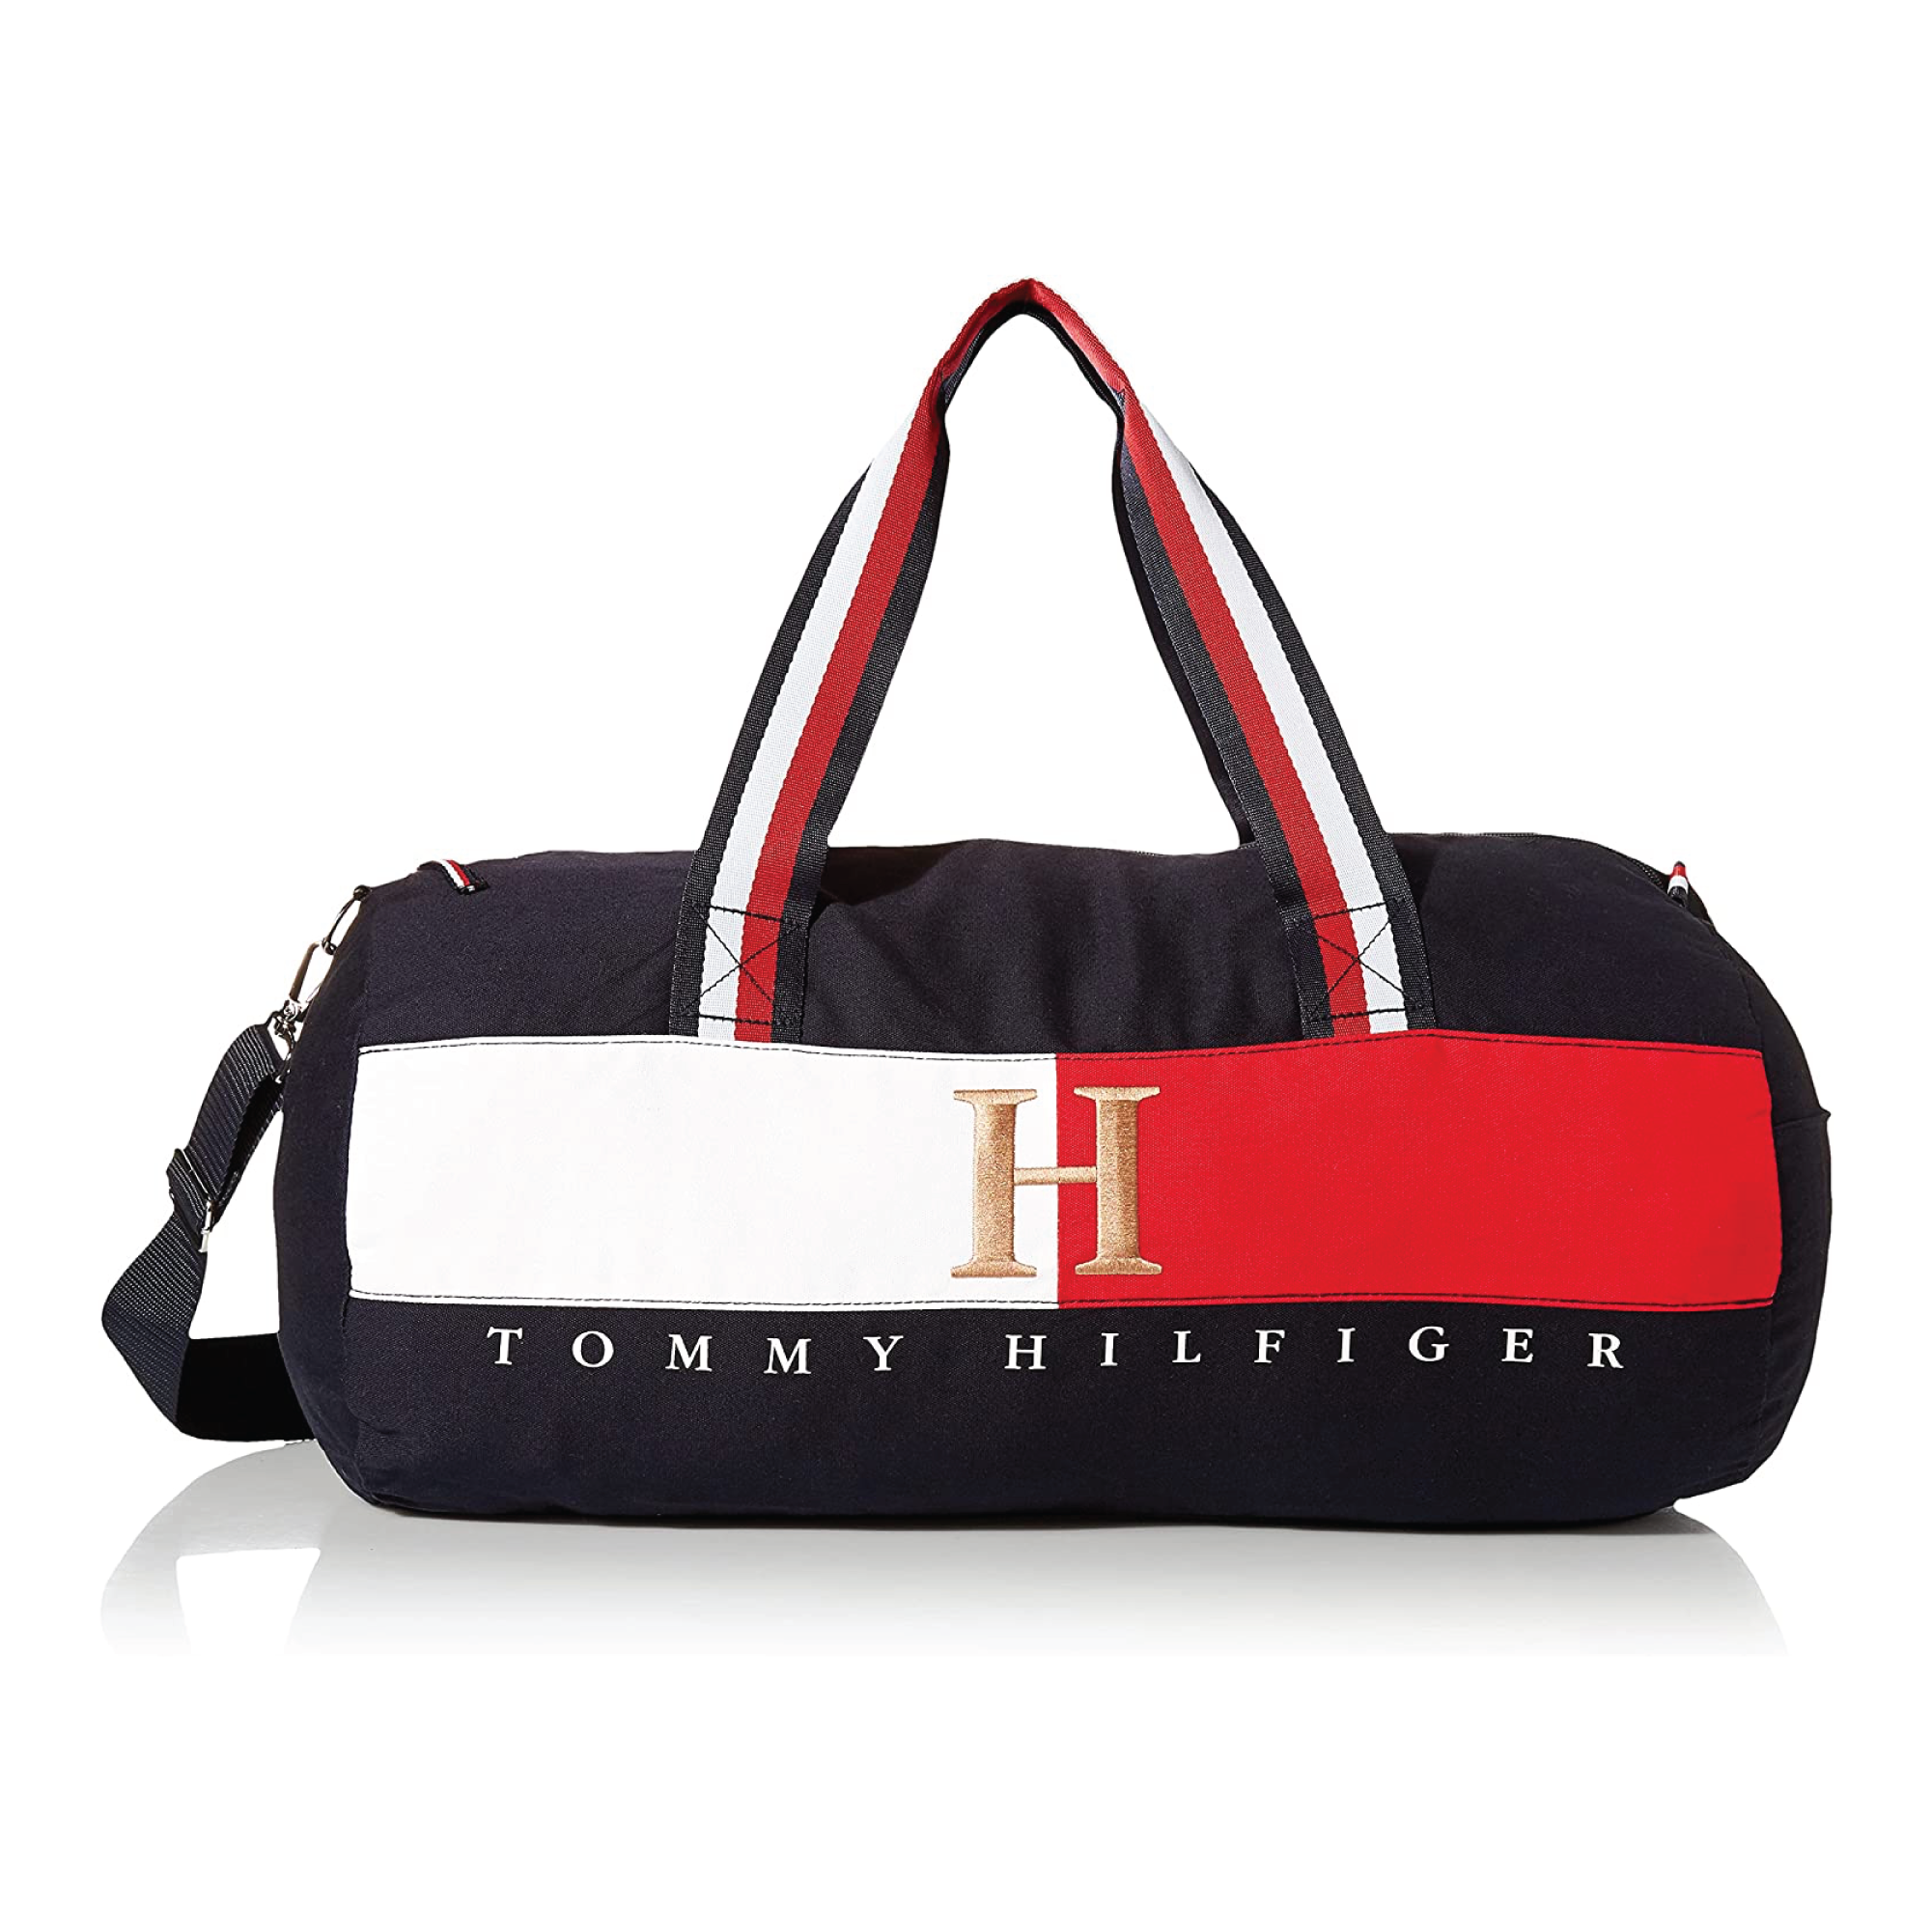 ALY | DESIGN | PROJECT MANAGEMENT - tommy hilfiger, dennis duffle accessory design